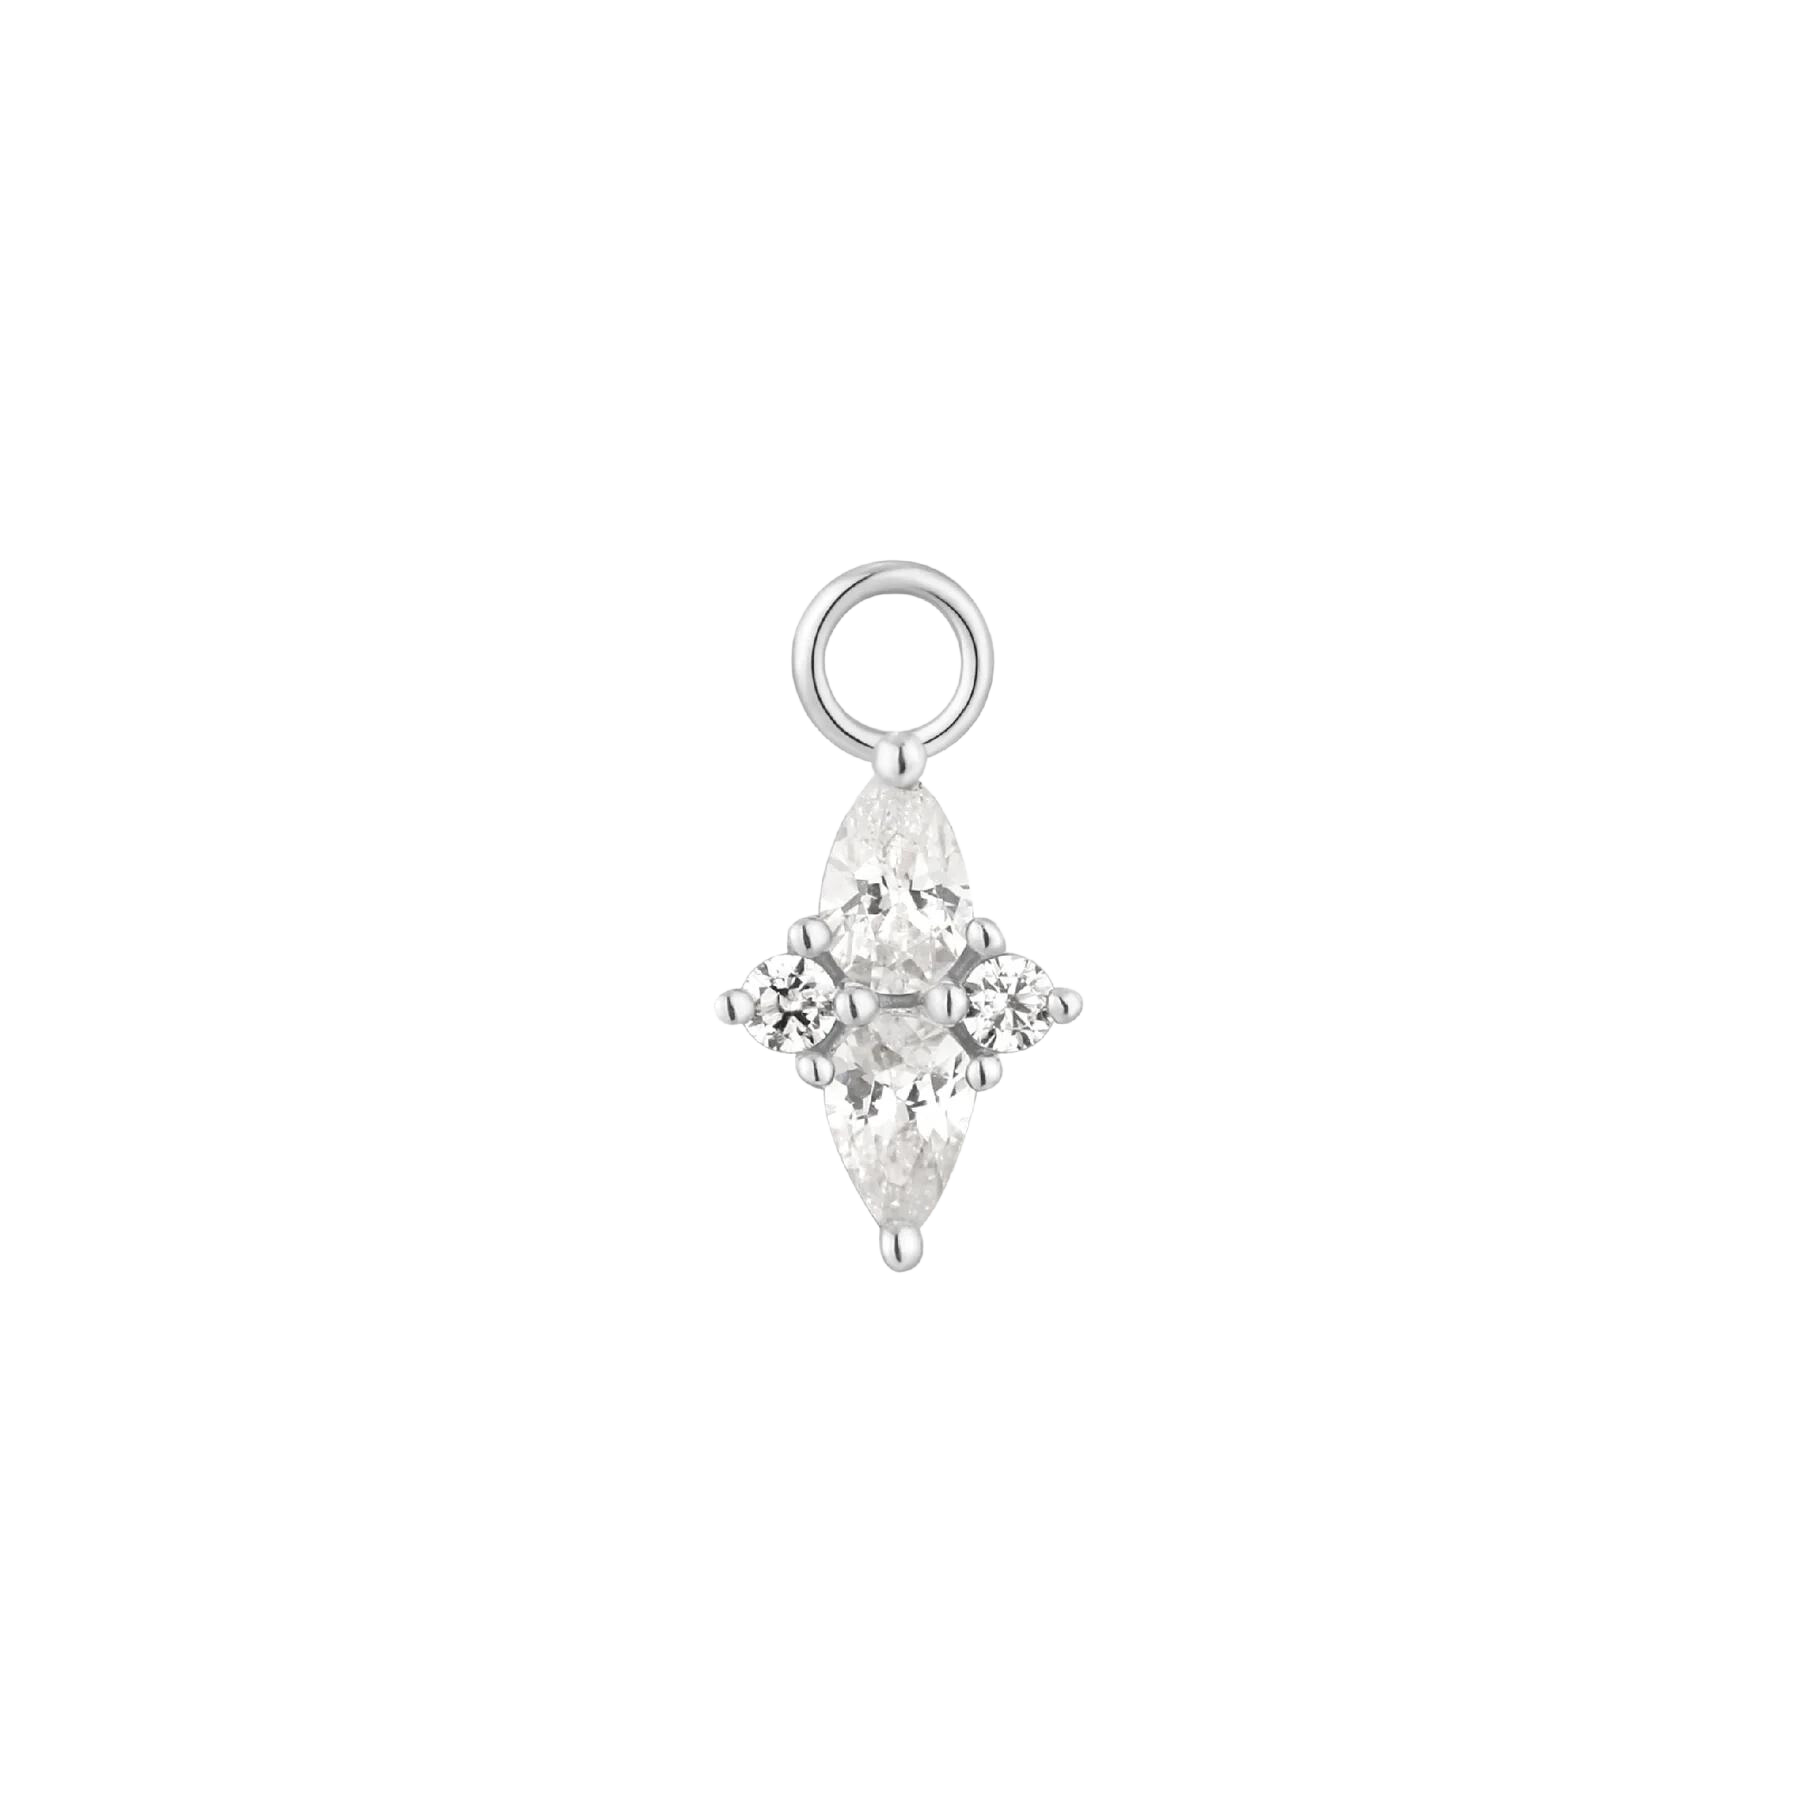 ETHEREAL - CZ - GOLD CHARM piercing-zone.com